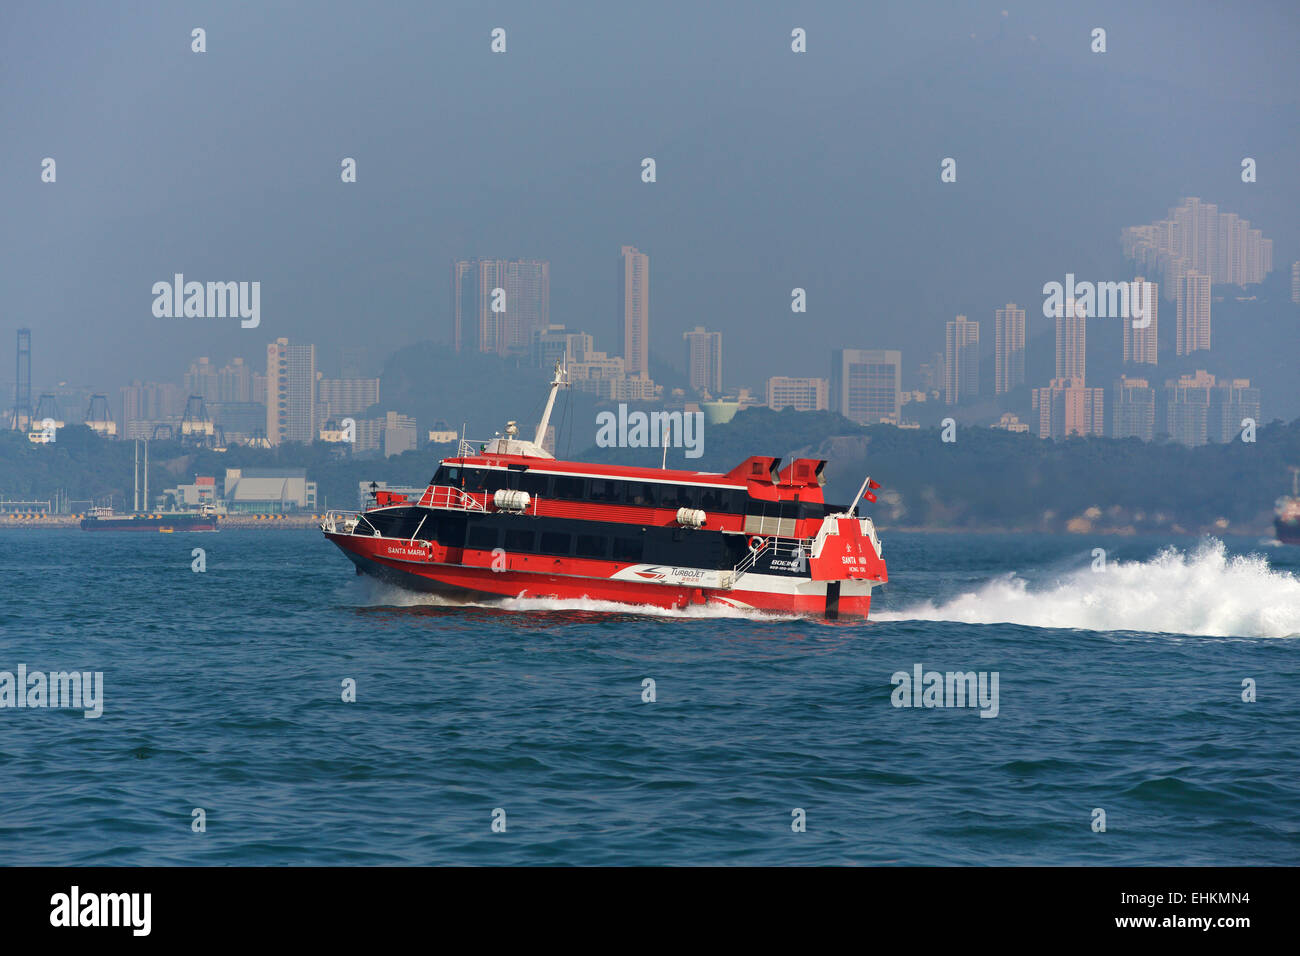 Hydrofoil at speed. The Hong Kong HK ferry service operated by Turbojet, Stock Photo